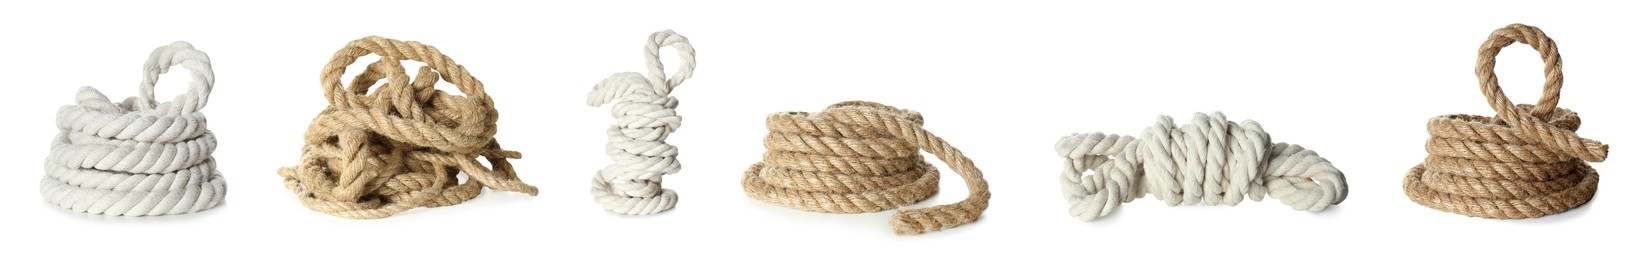 Set with bundles of different ropes on white background